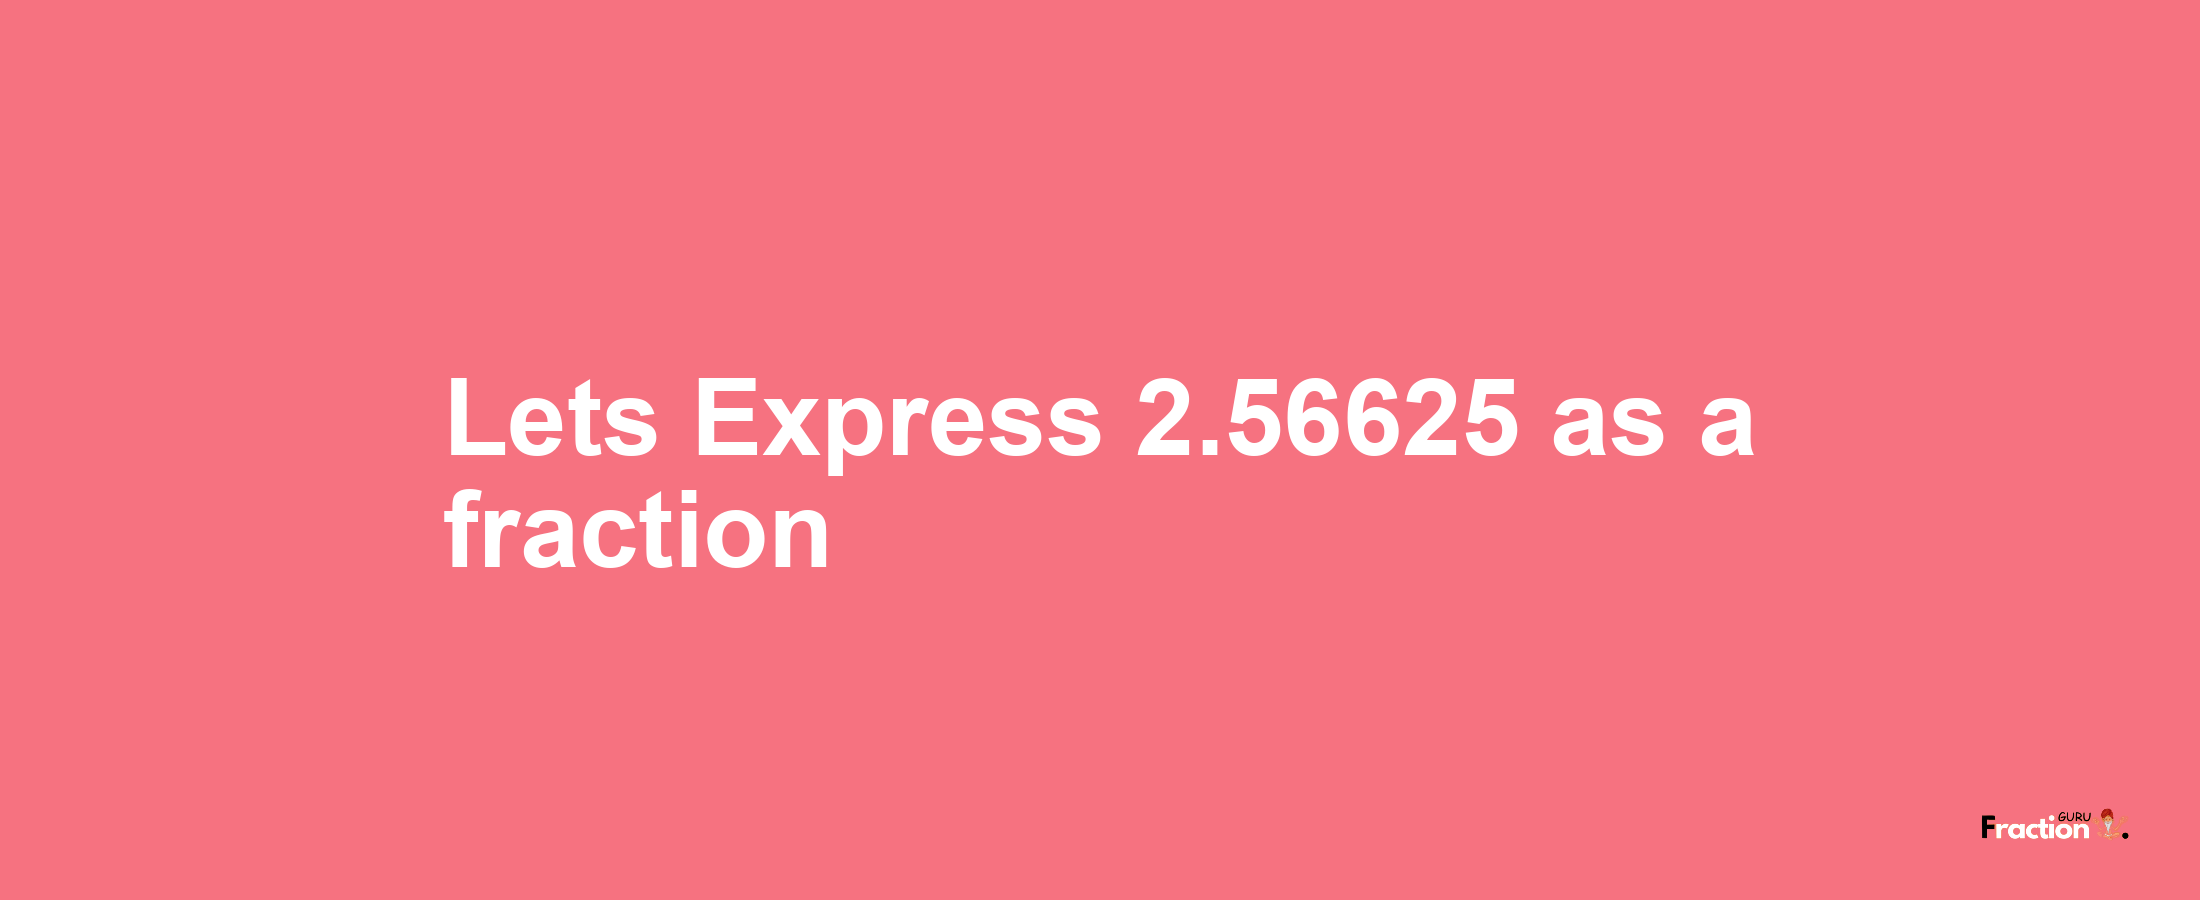 Lets Express 2.56625 as afraction